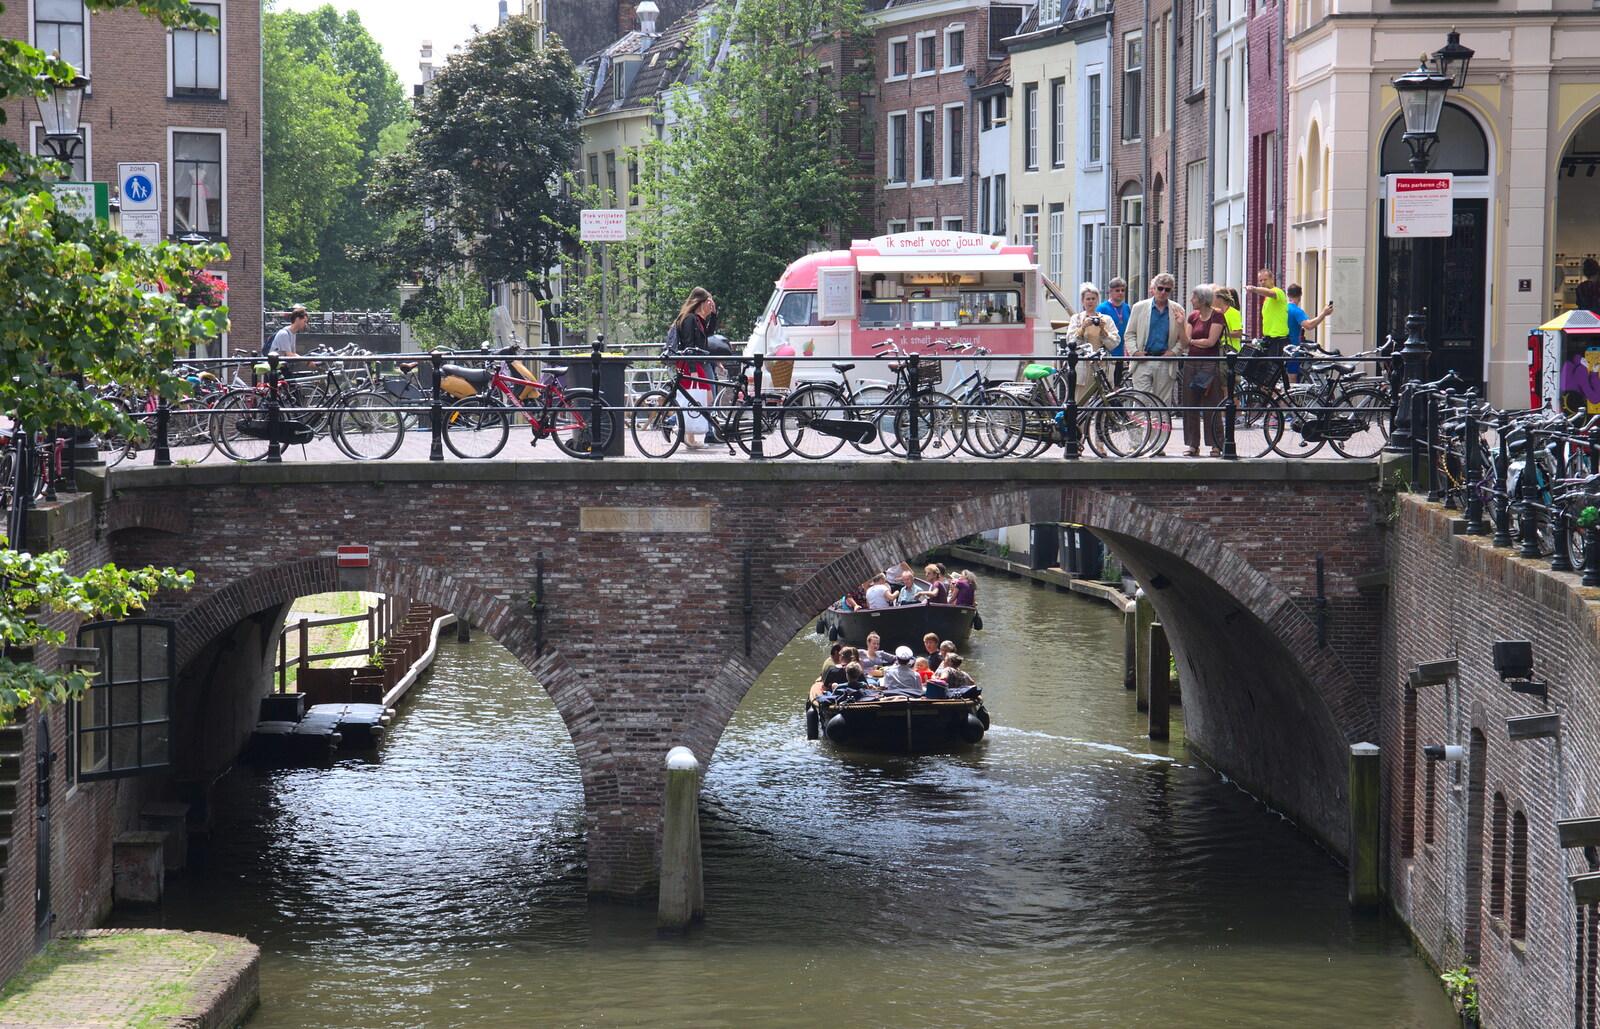 People in boats drift under the bridges from A Postcard from Utrecht, Nederlands - 10th June 2018